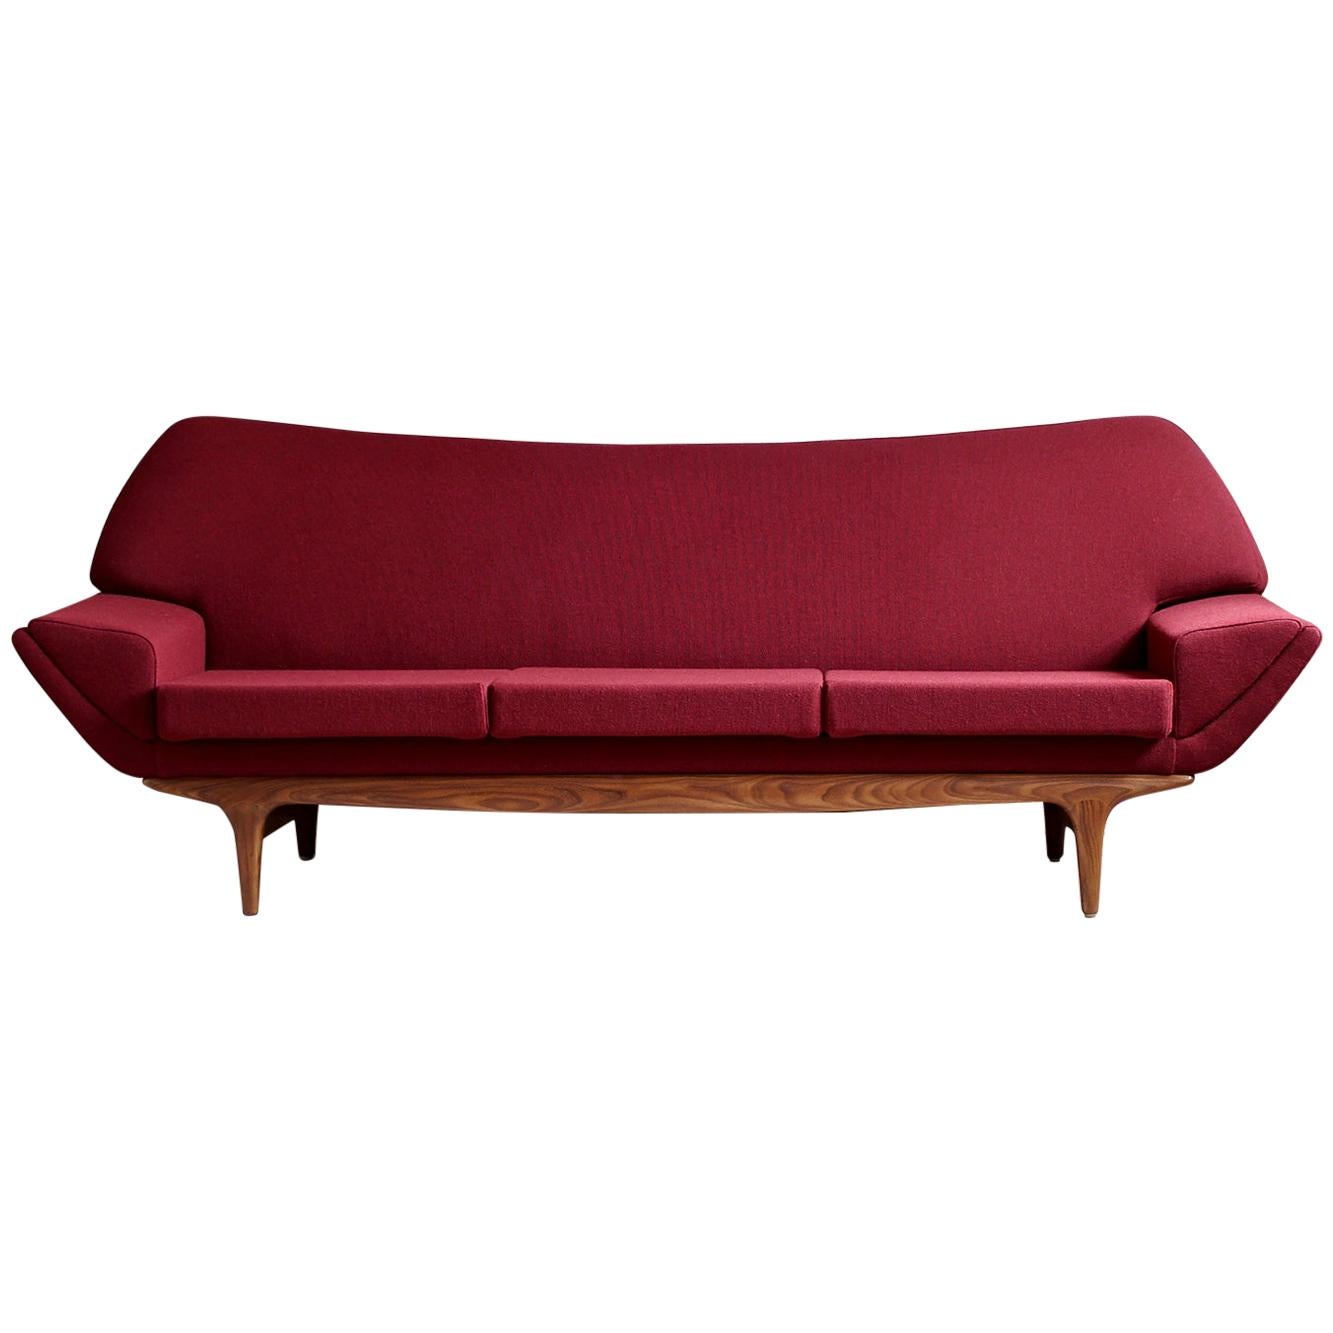 Johannes Andersen Sofa for AB Trensums reupholstered in Kvadrat Fabric, 1950s